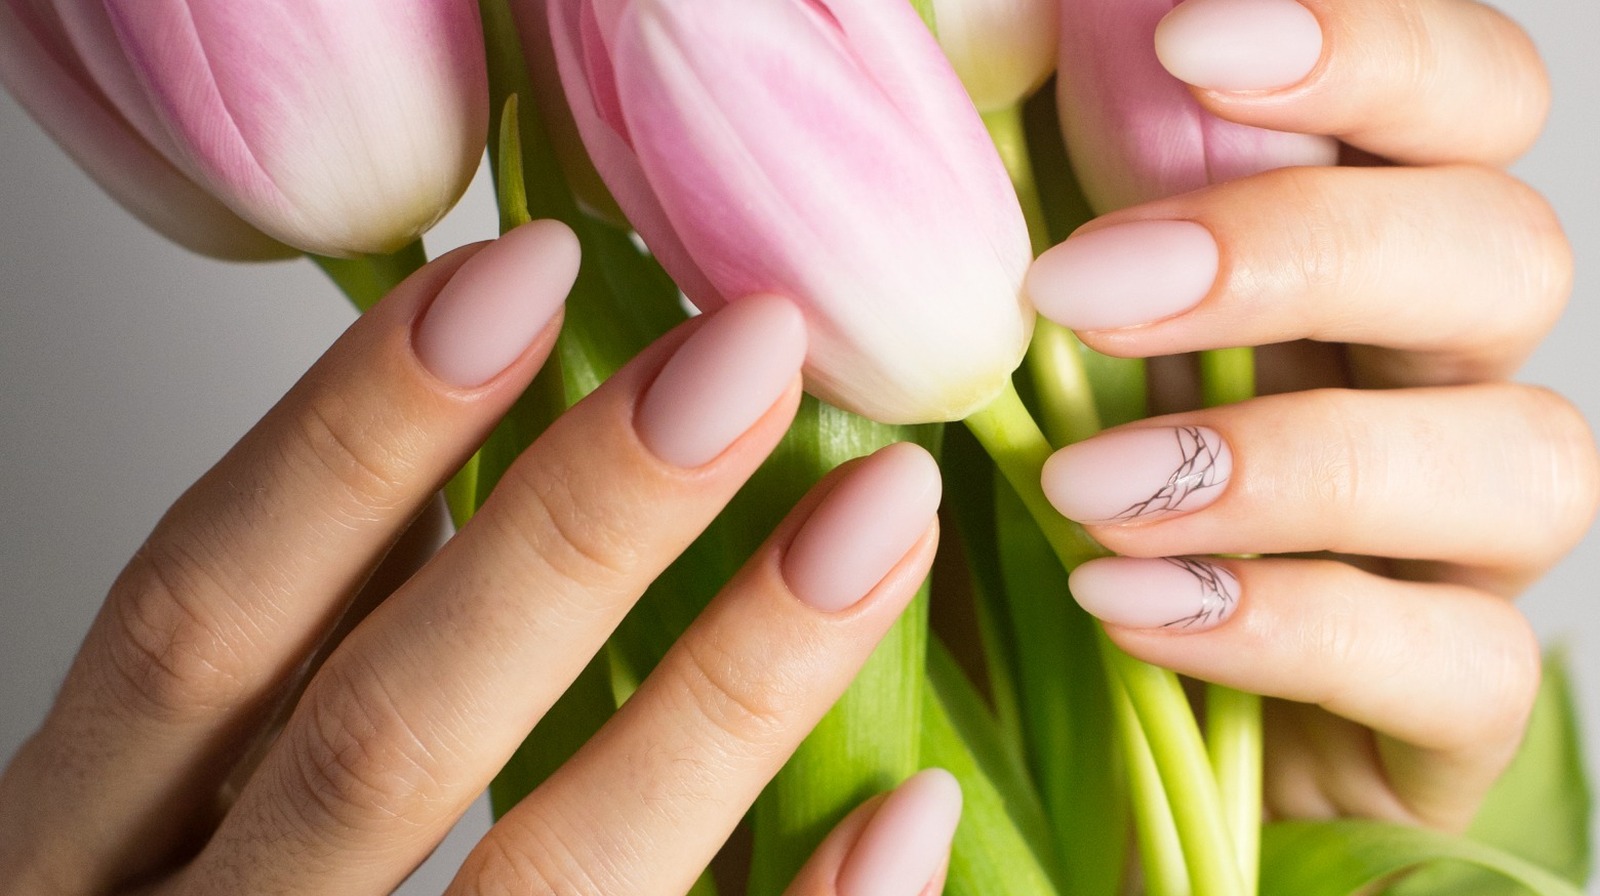 Milk nails are huge for 2023 and the celebs are so on board